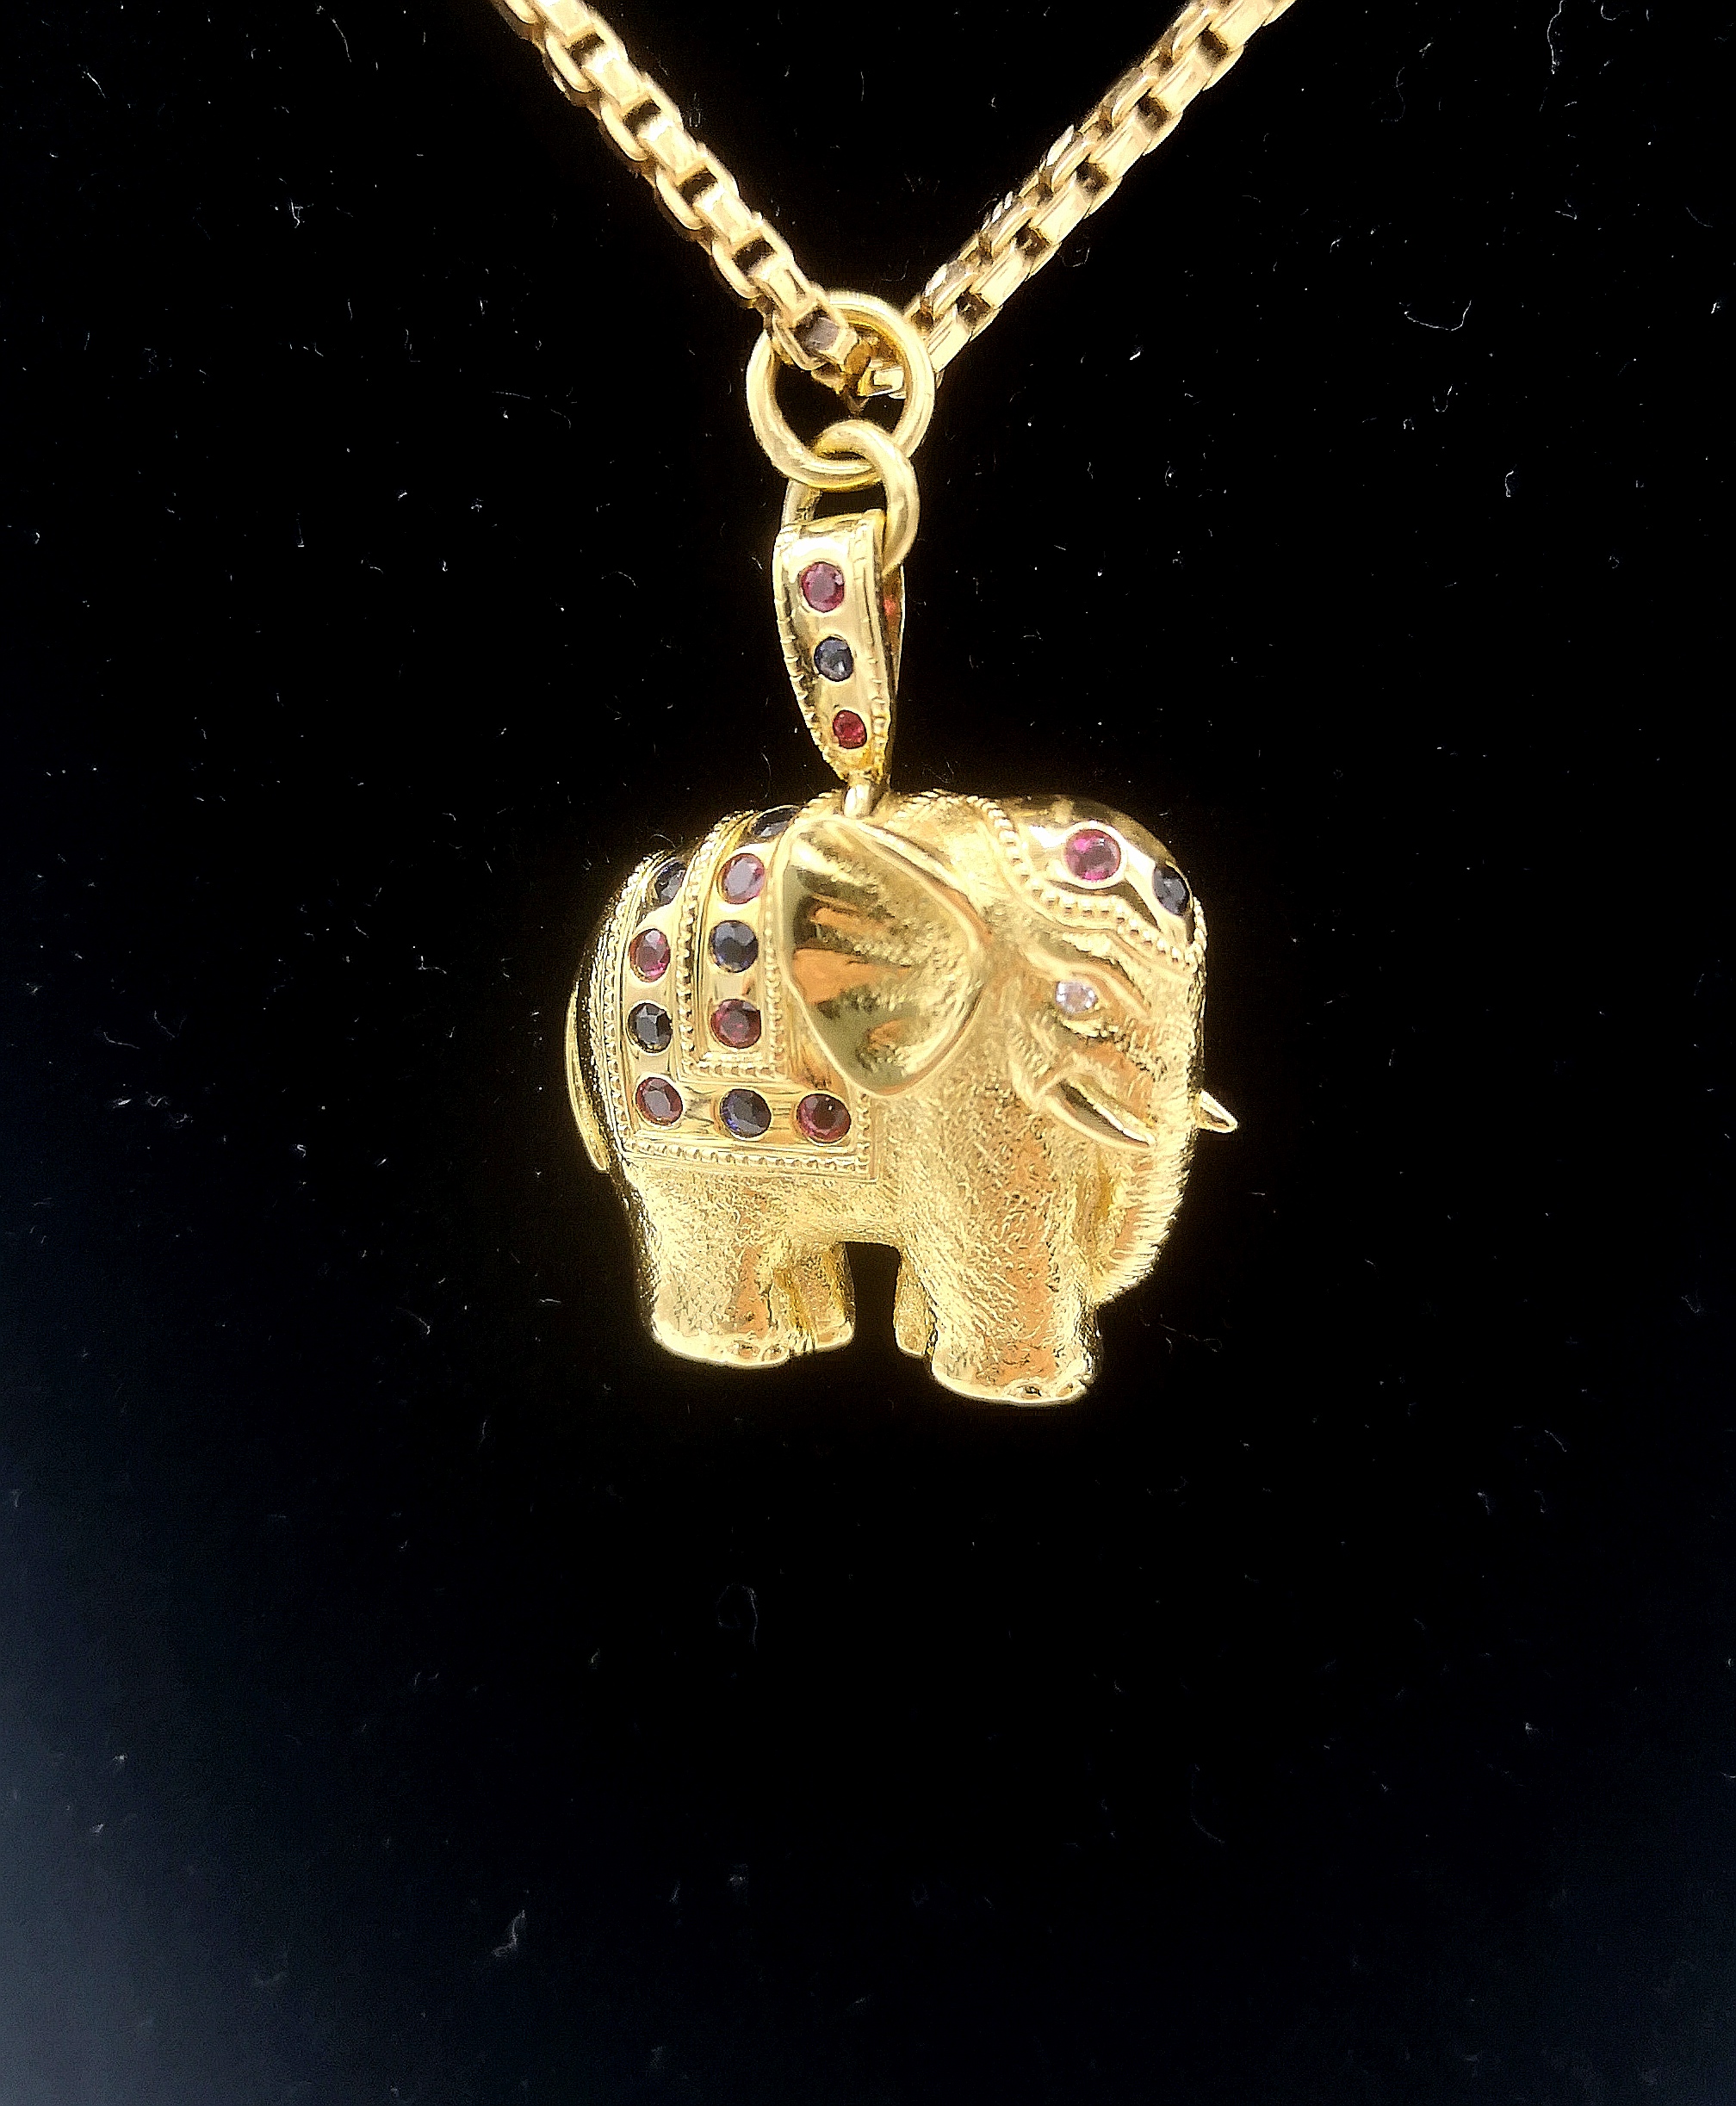 18ct gold elephant pendant set with gemstones on 18ct gold chain - Image 2 of 2